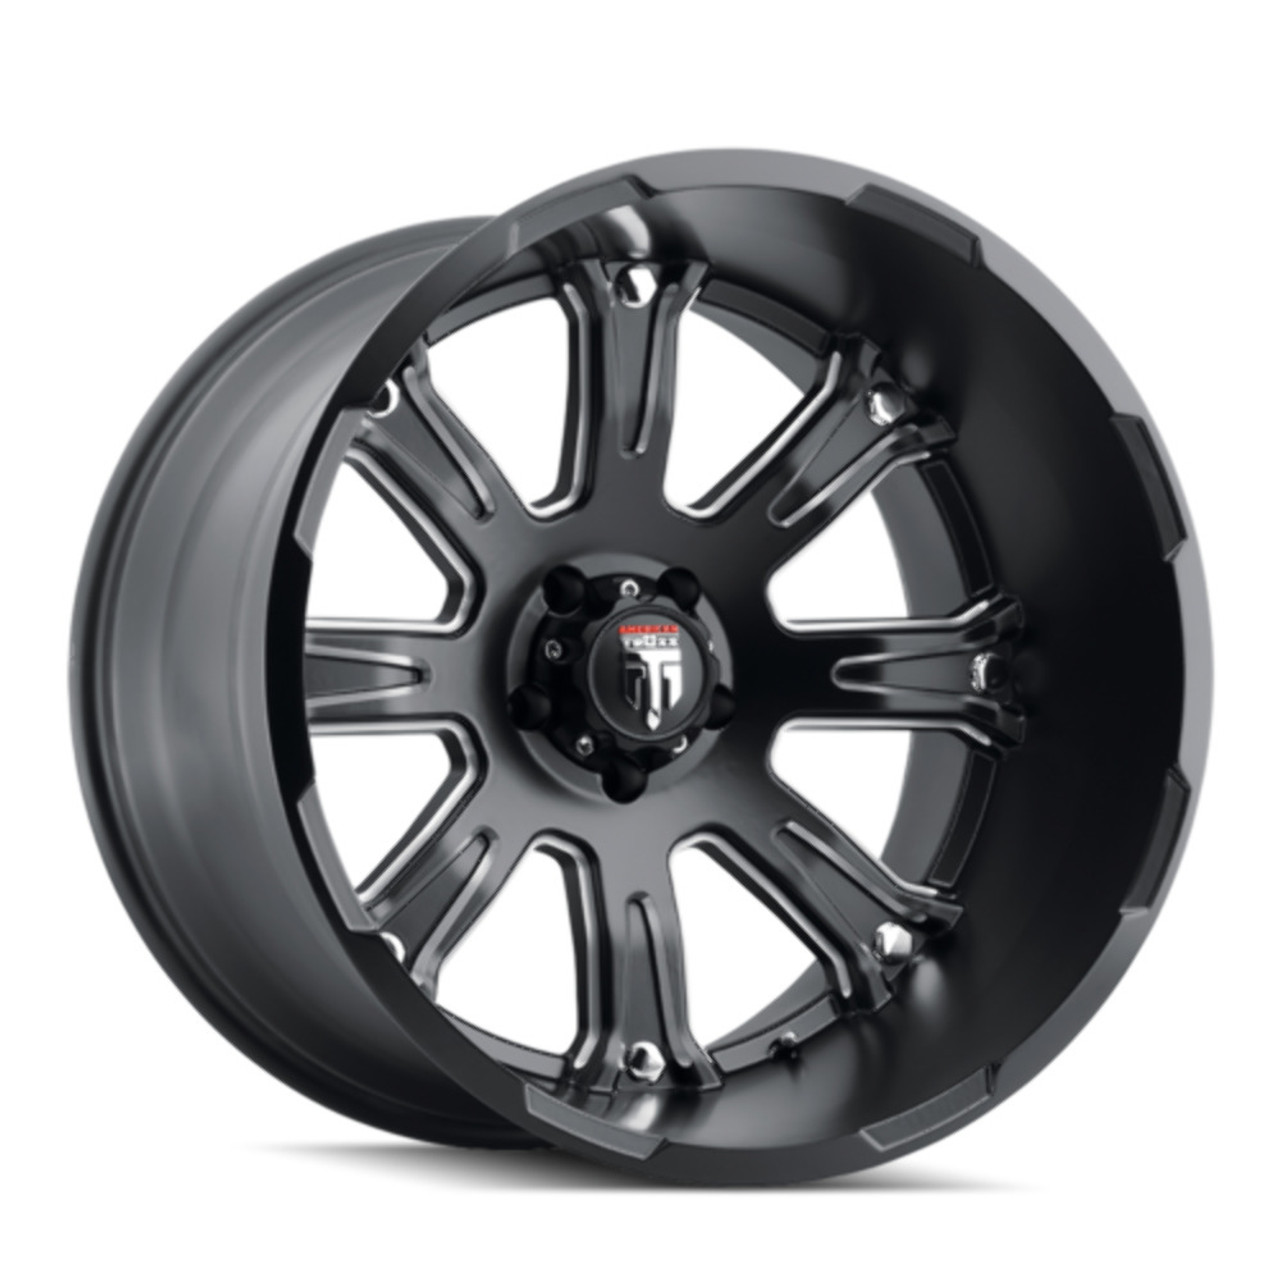 20" American Truxx Bomb 20x12 Black Milled 8x170 Wheel -44mm Lifted For Ford Rim